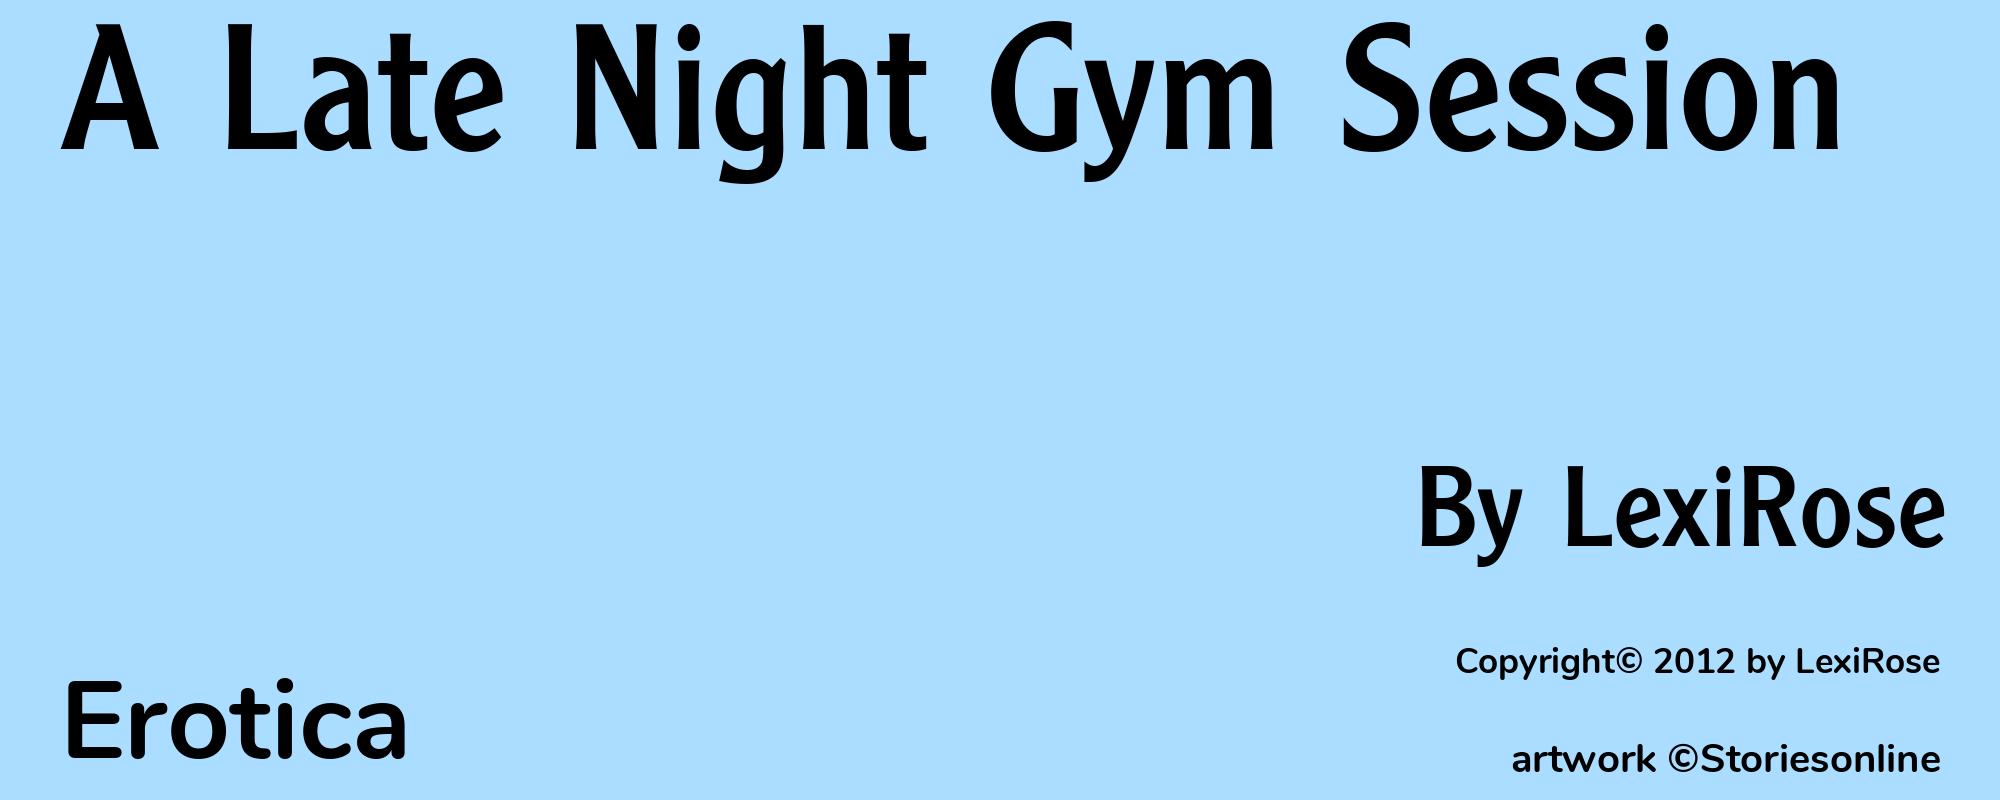 A Late Night Gym Session - Cover